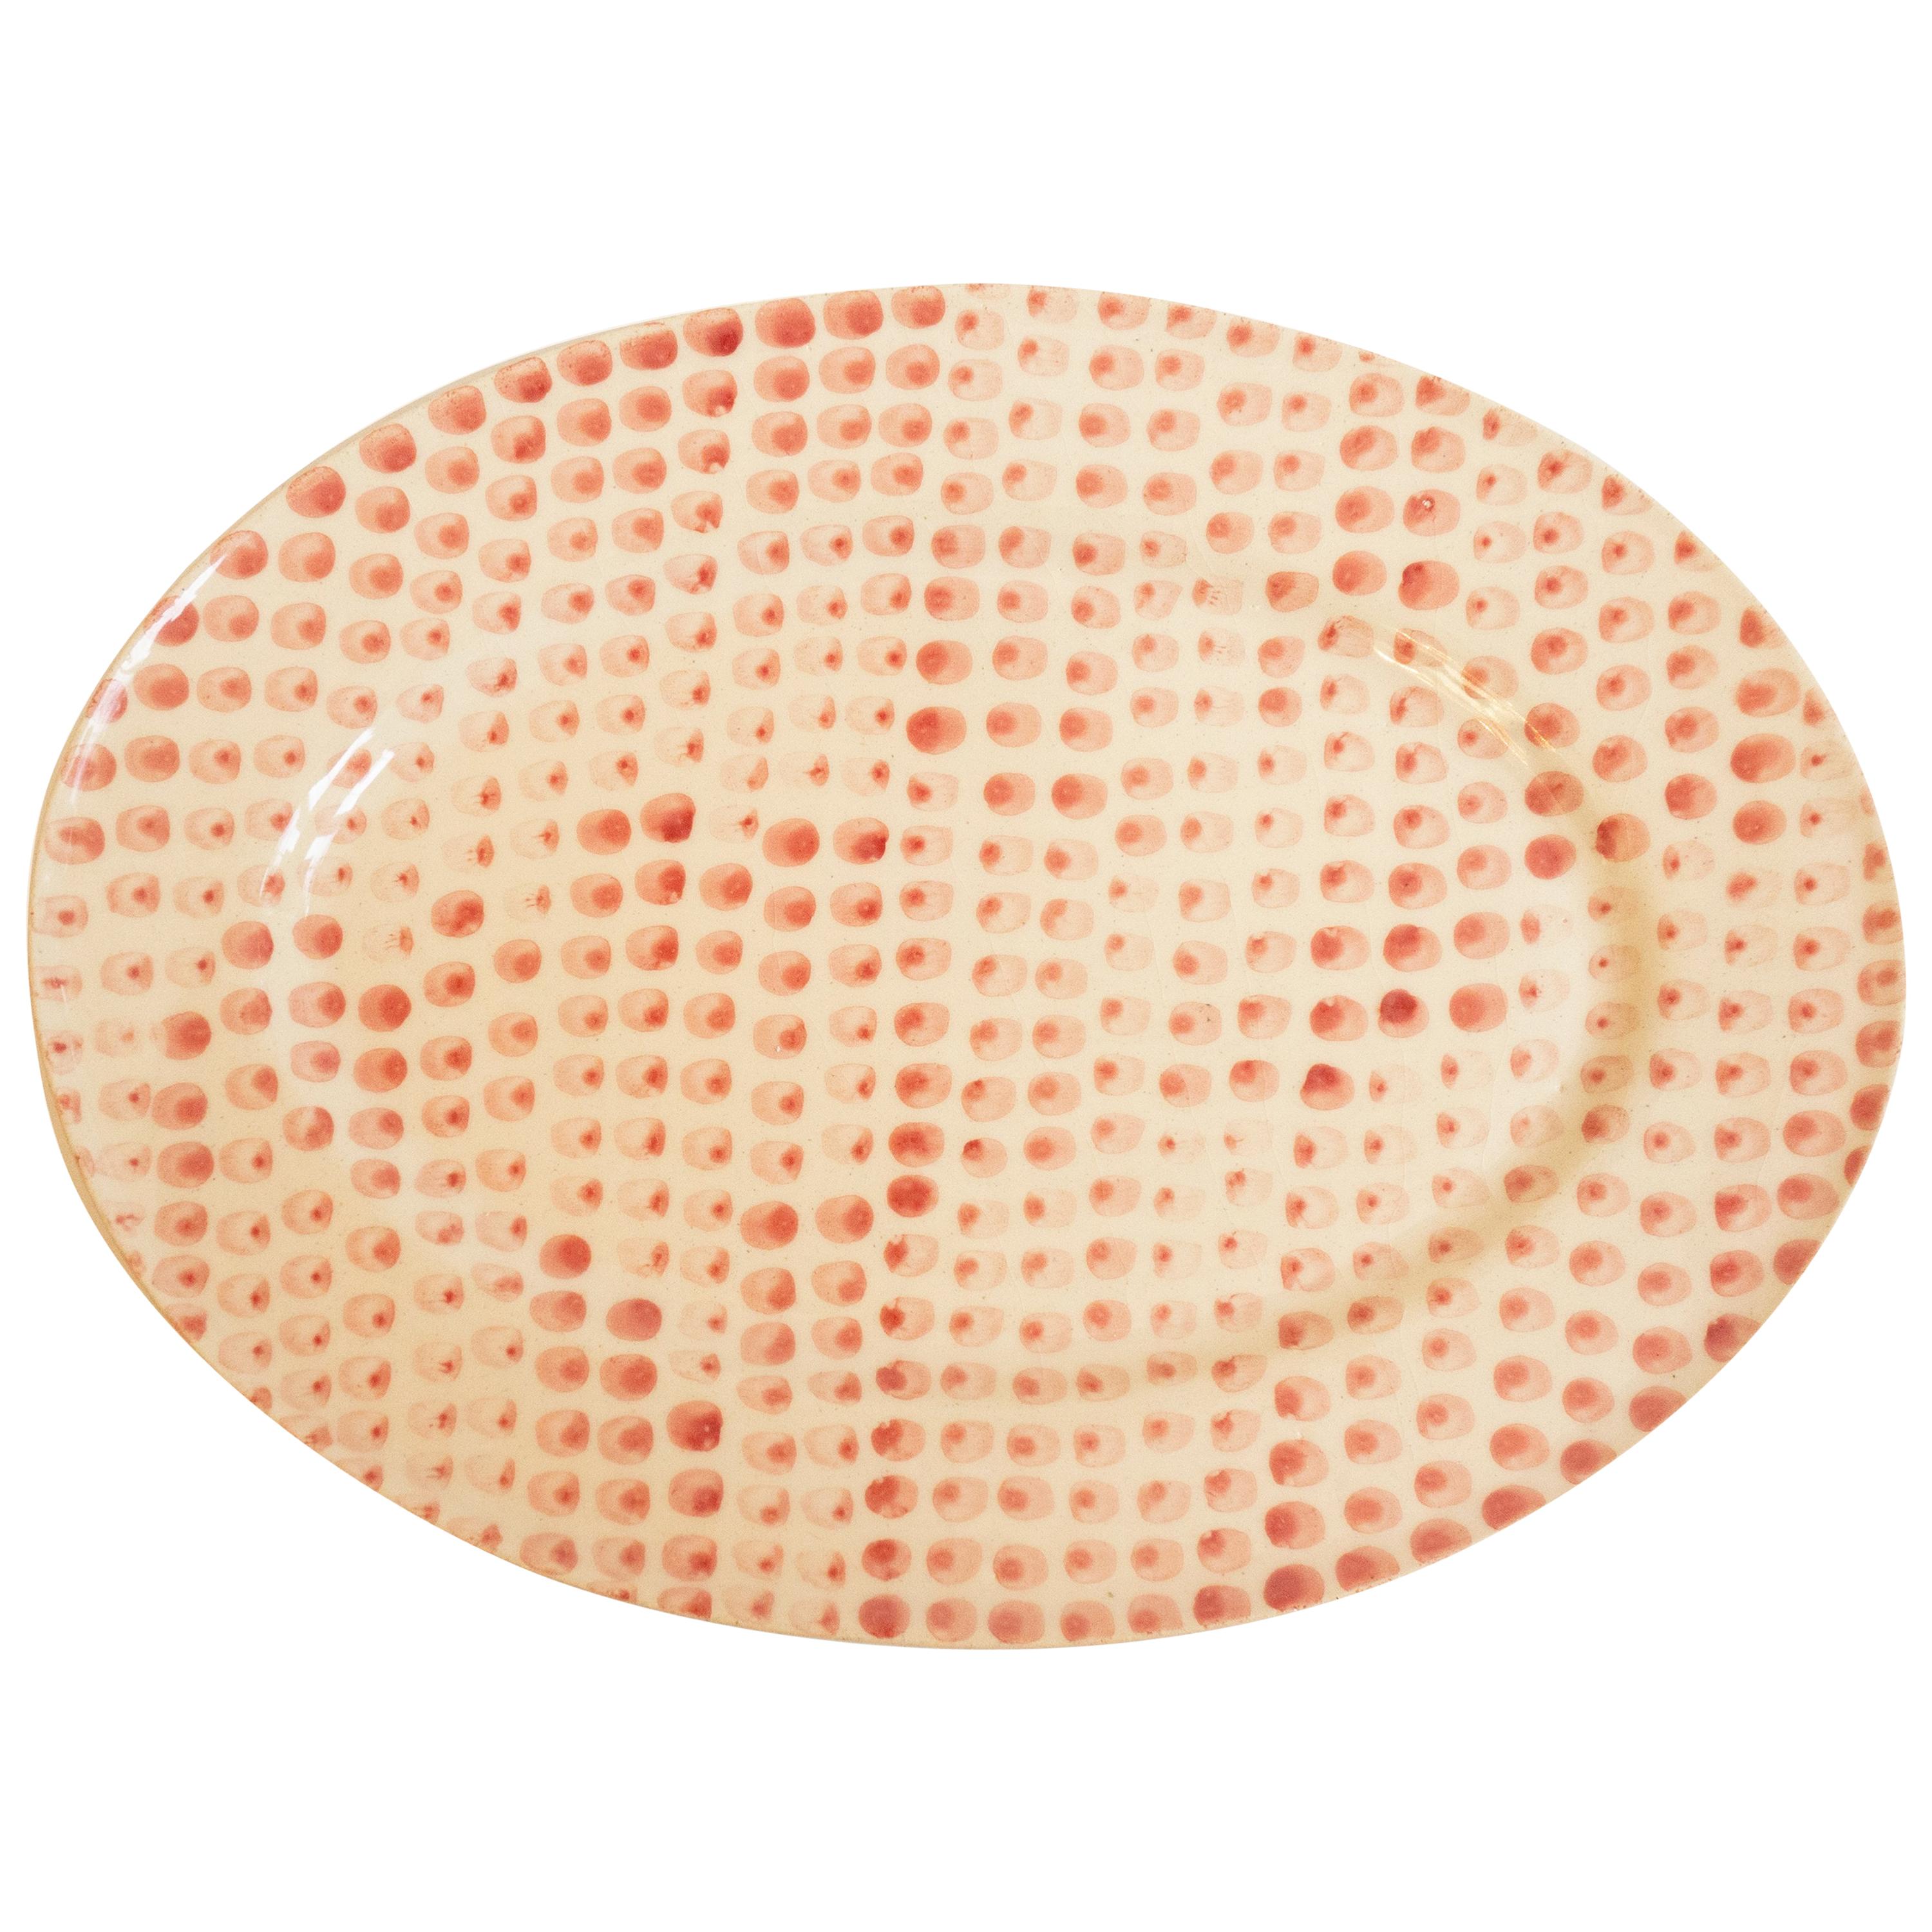 Hand Painted Ceramic Serving Platter with Dot Pattern